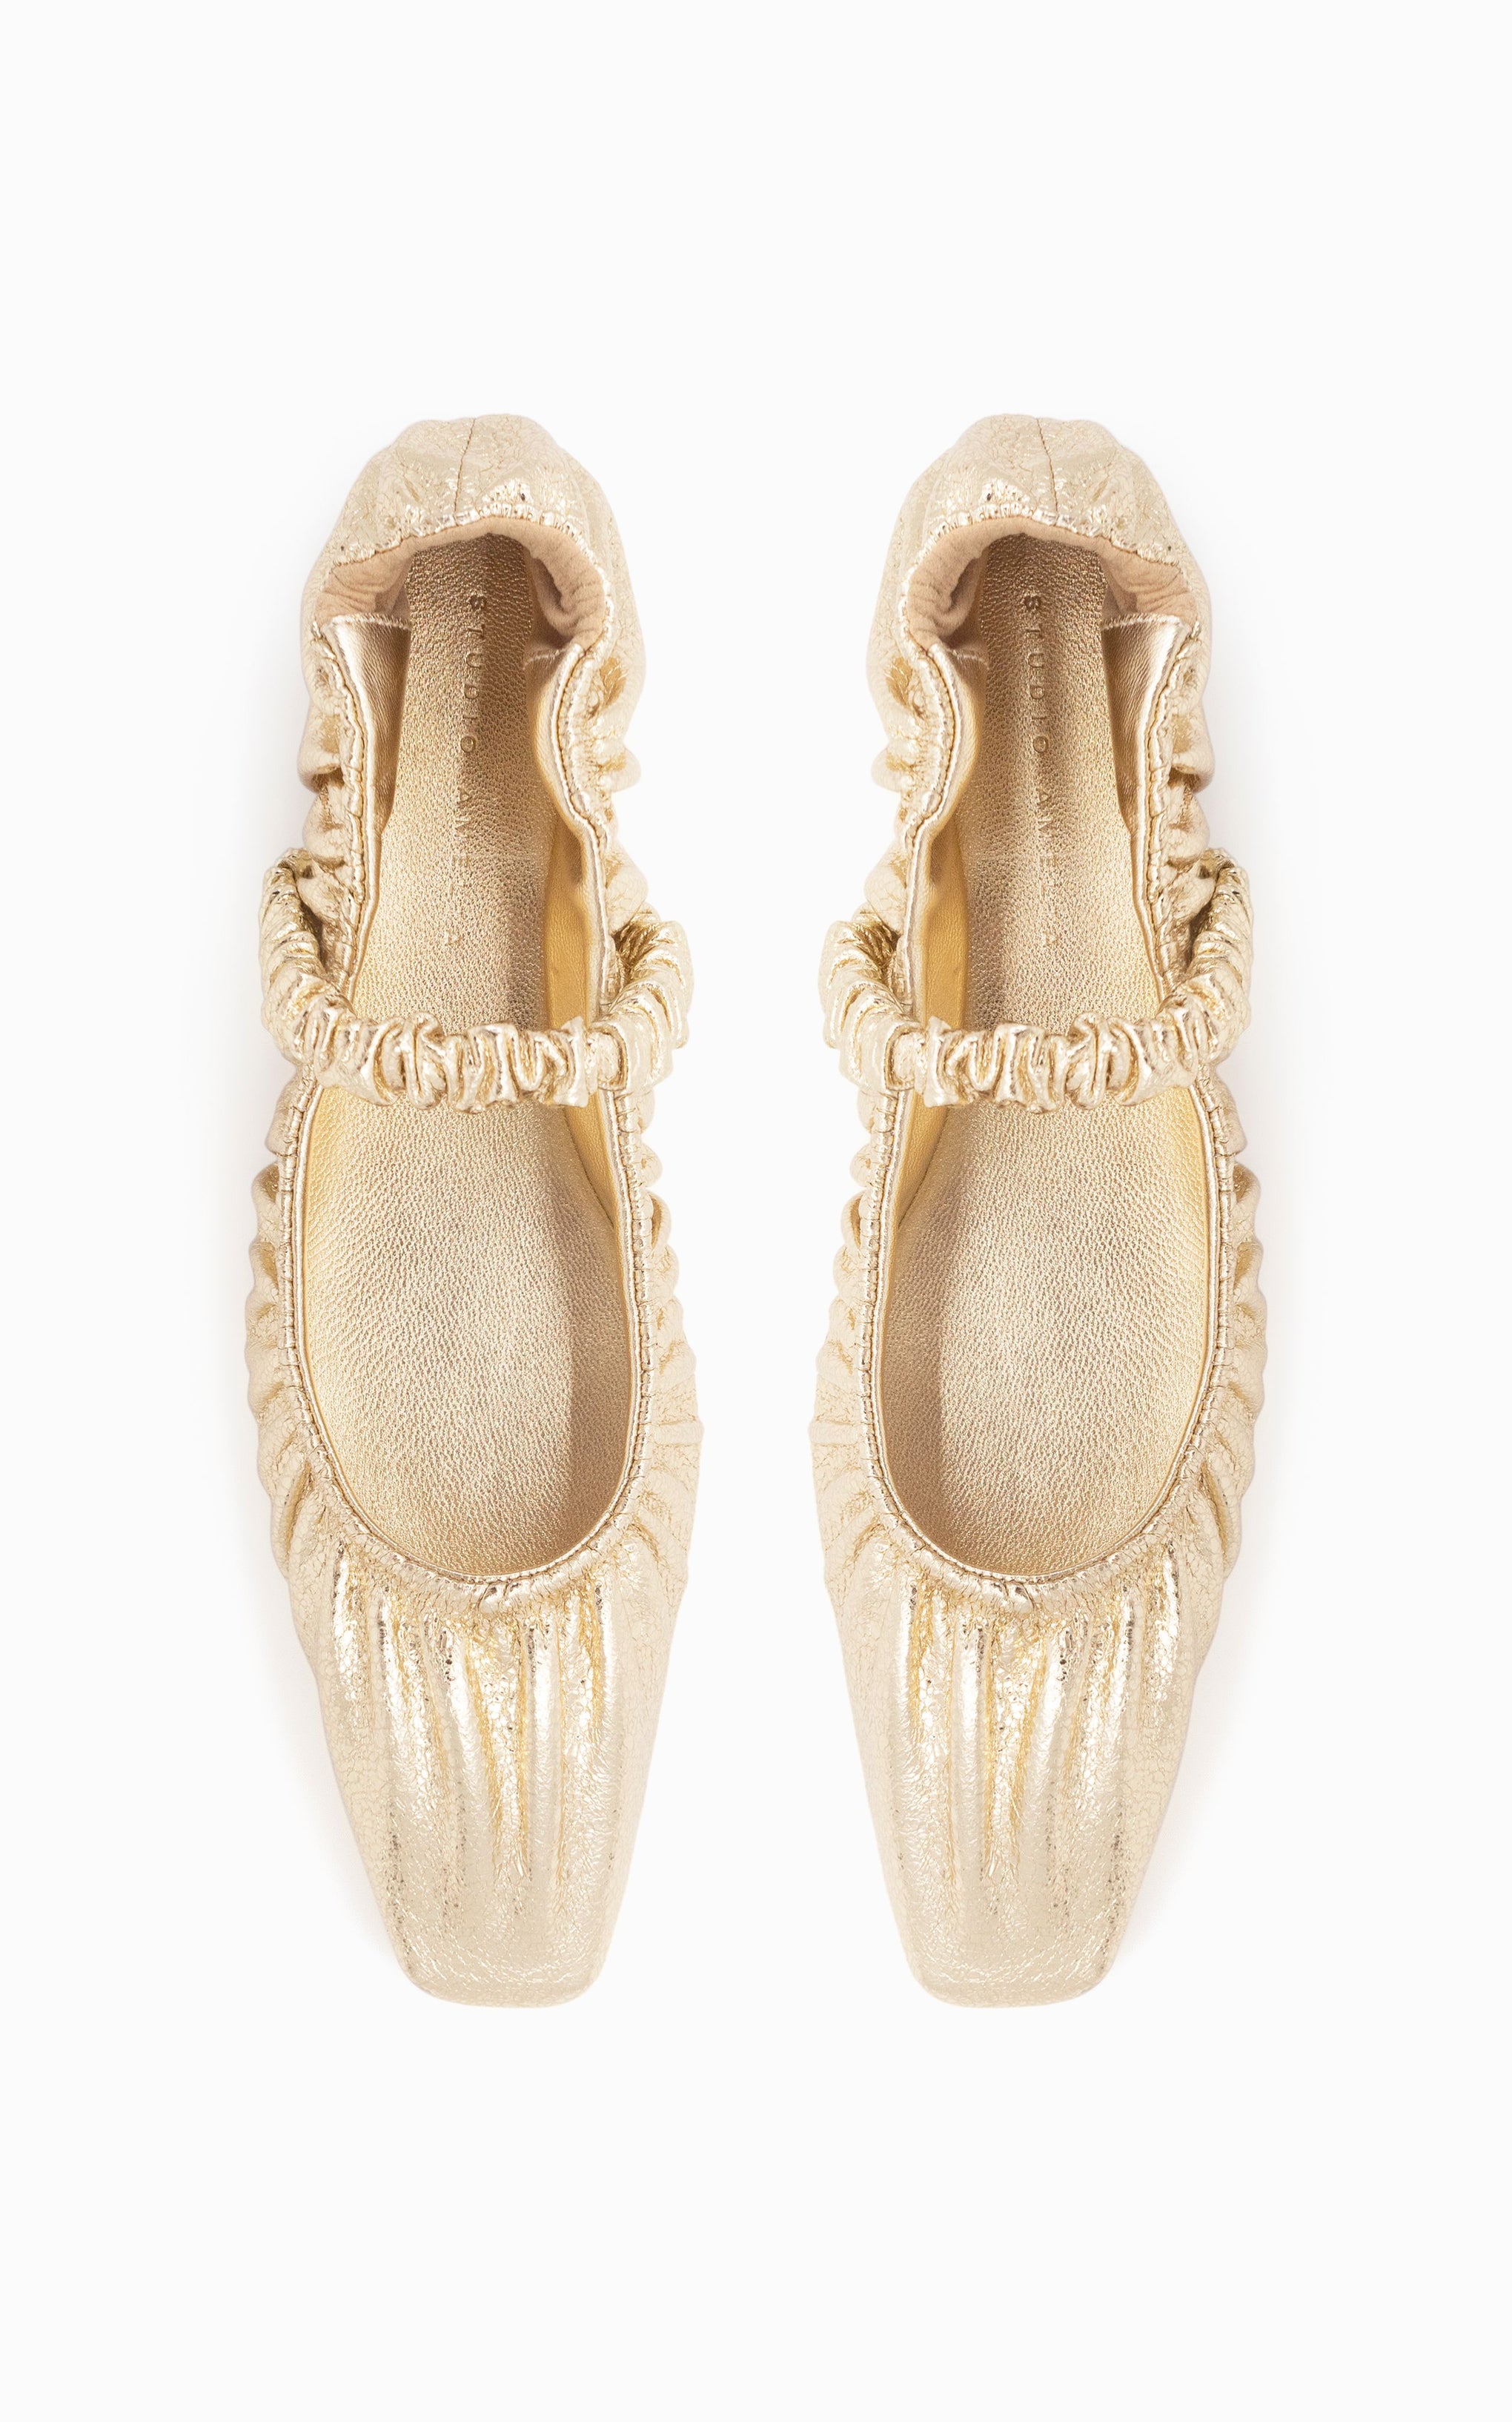 The Studio Amelia Zadie Ballet Flat in Gold available at The New Trend Australia